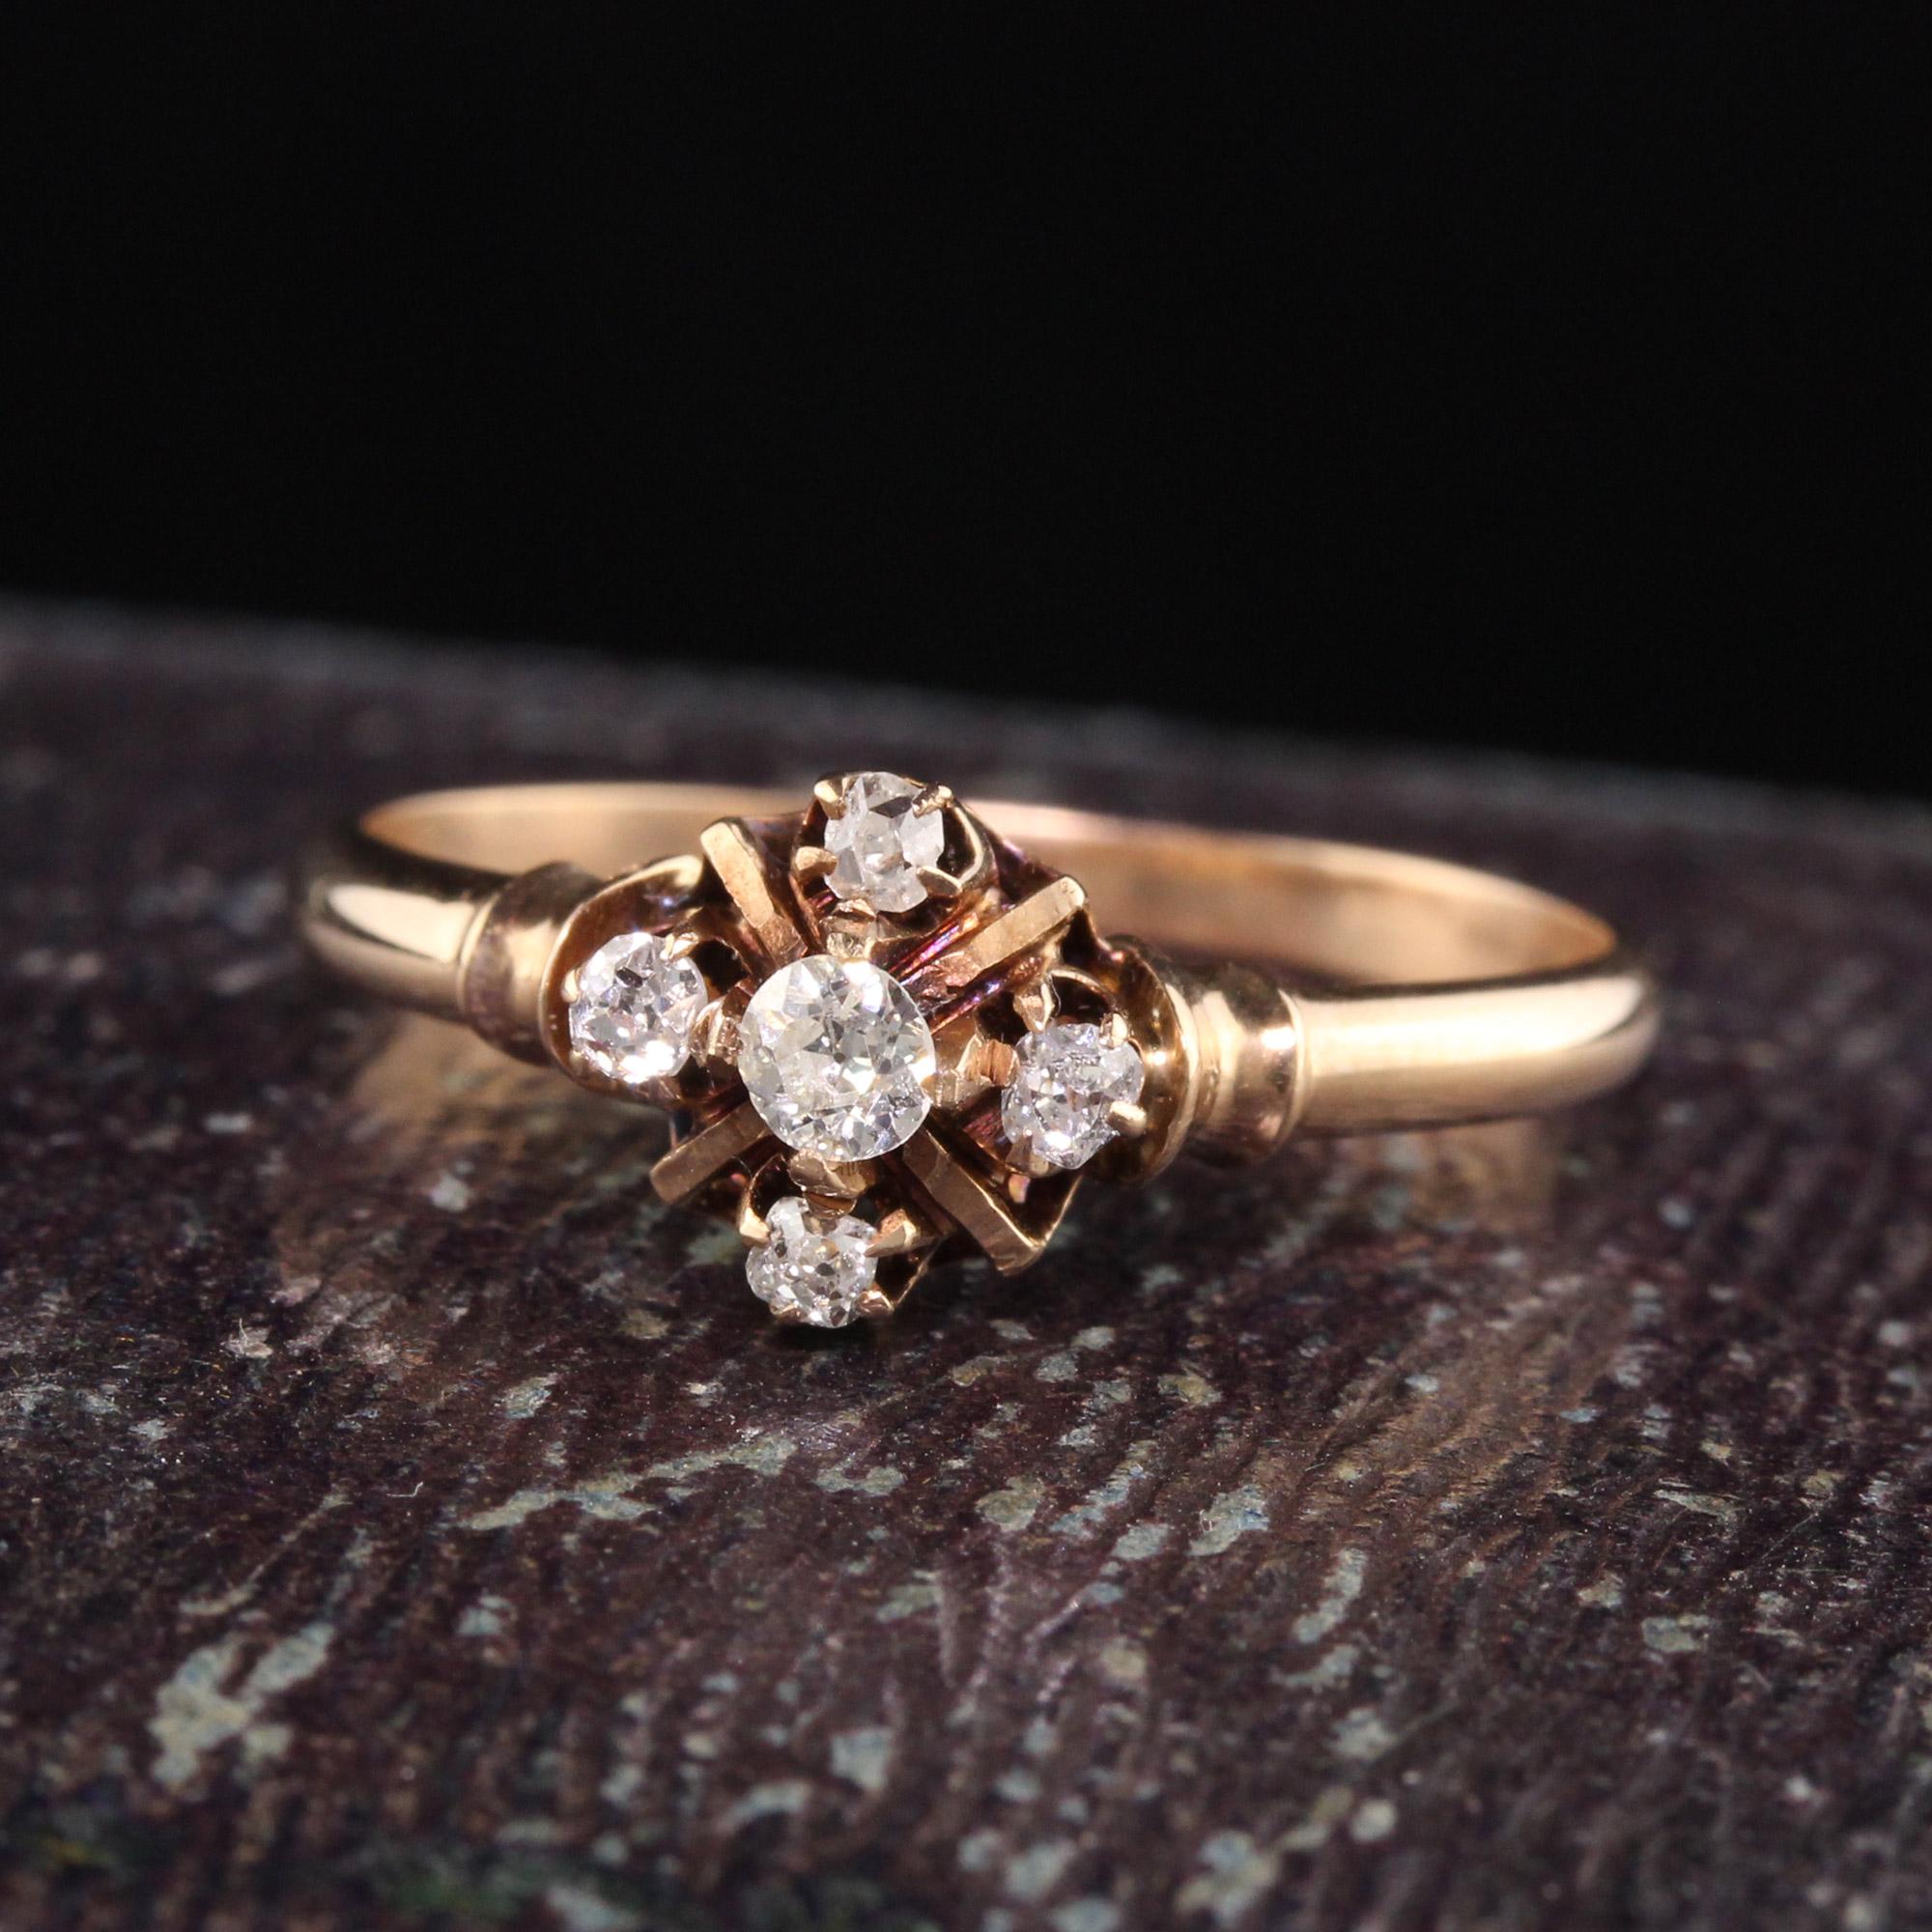 Beautiful Antique Victorian 14K Rose Gold Old Mine Cut Diamond Ring.This dainty Victorian ring has 5 beautiful old mine cut diamonds in a subtle design.

Item #R0993

Metal: 14K Rose Gold

Weight: 2.2 Grams

Diamonds: Approximately .25 cts

Color: